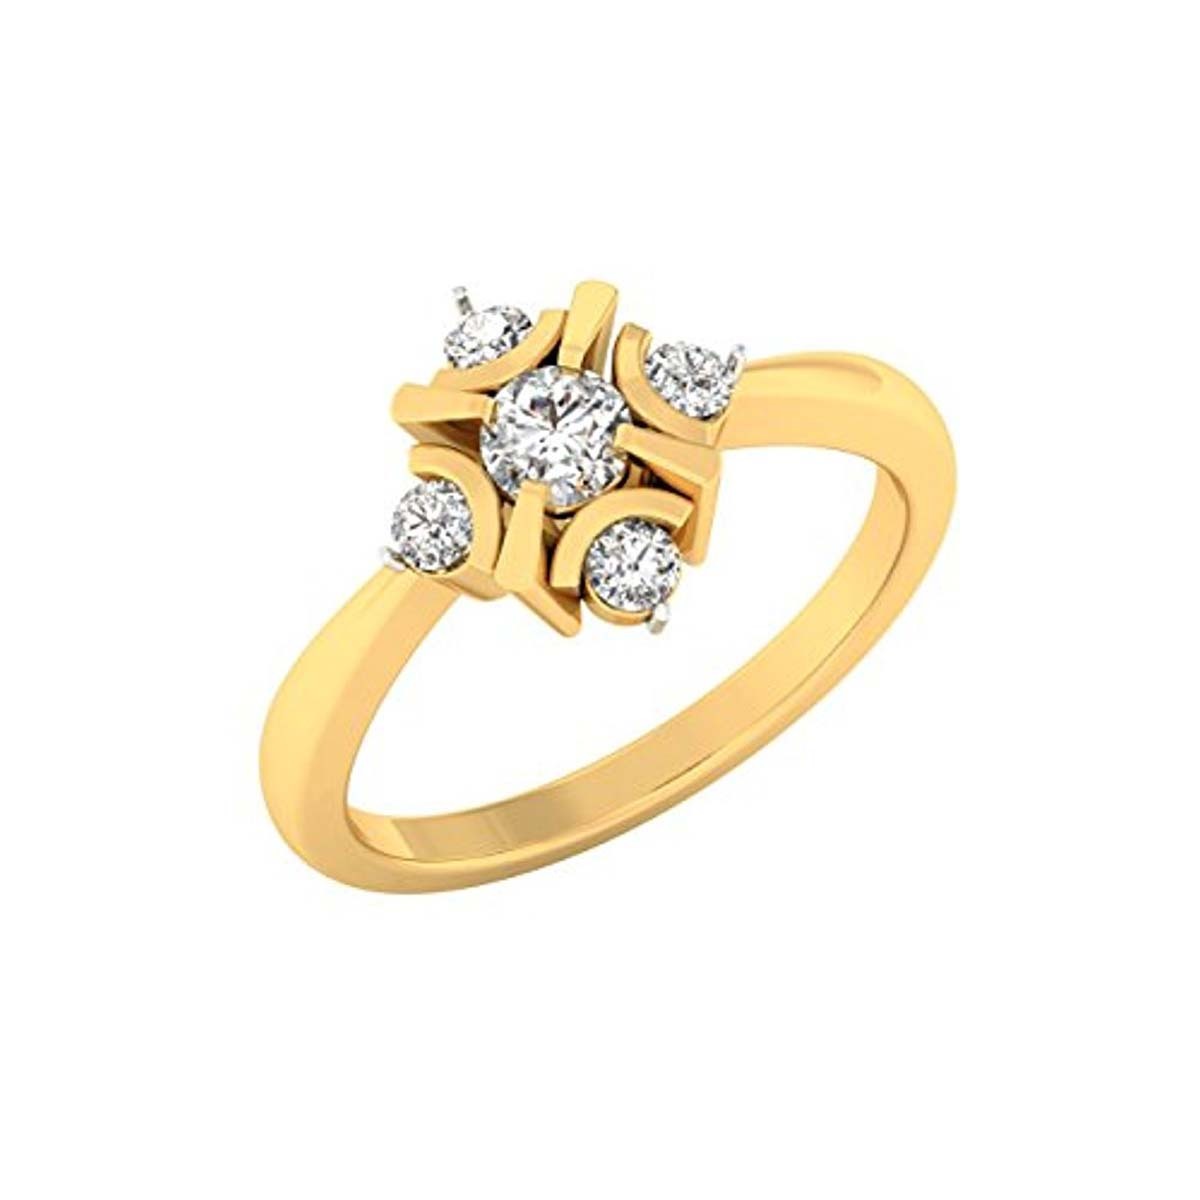 14K Yellow Gold Plated RD Cut White CZ Diamond Wedding Engagement Fancy Ring